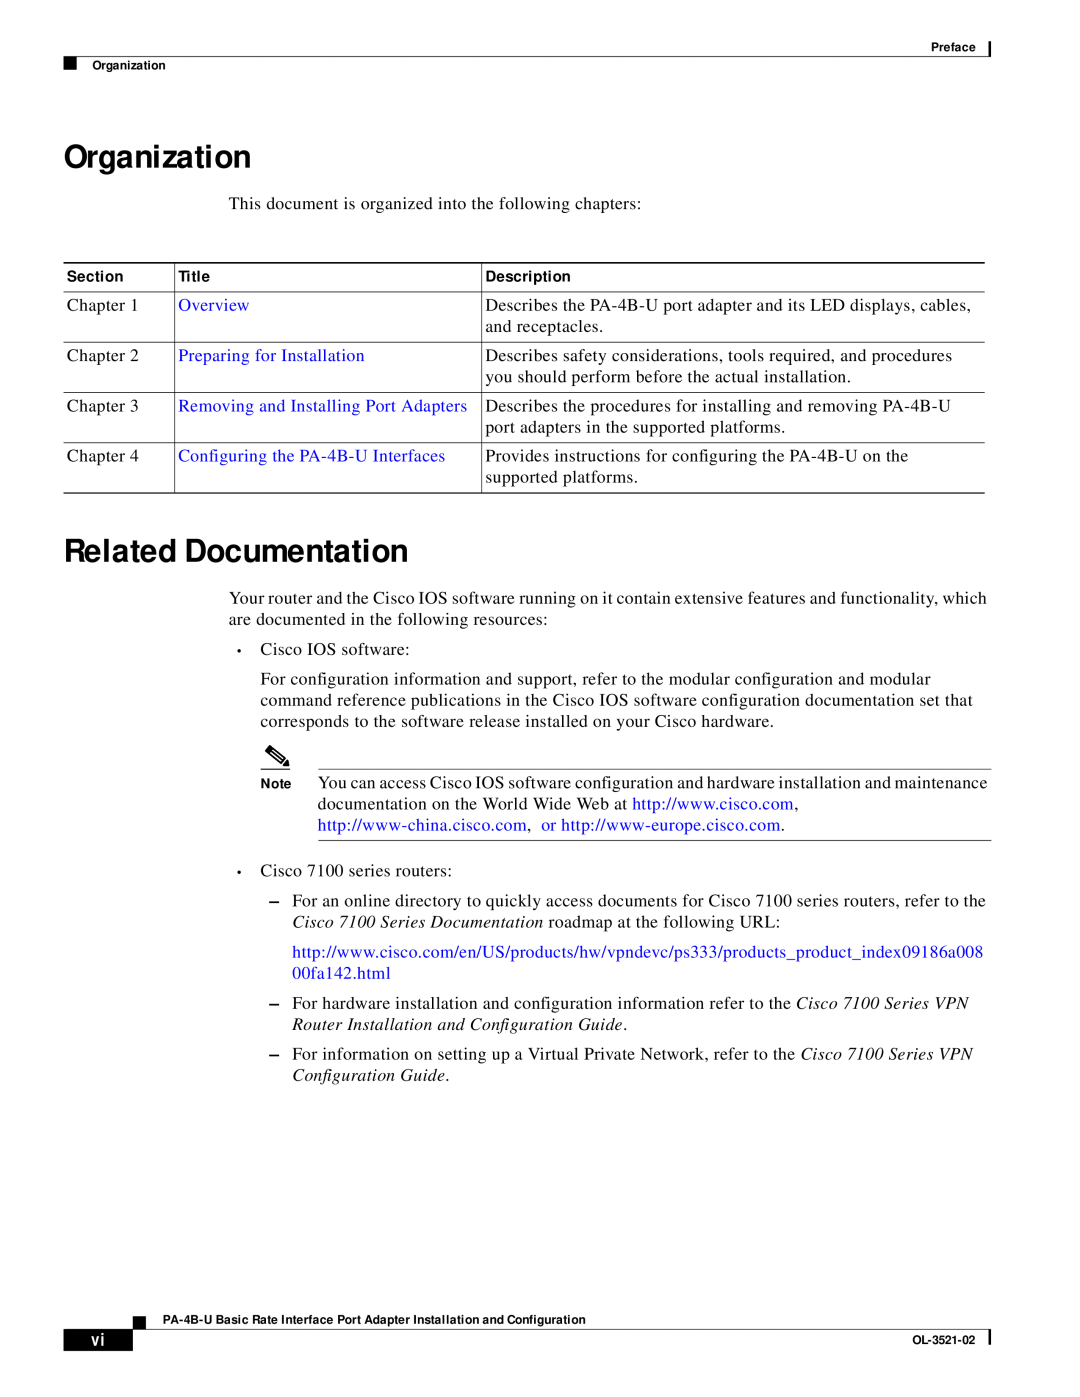 Cisco Systems PA-4B-U manual Organization, Related Documentation, Section, Title, Description, Overview 